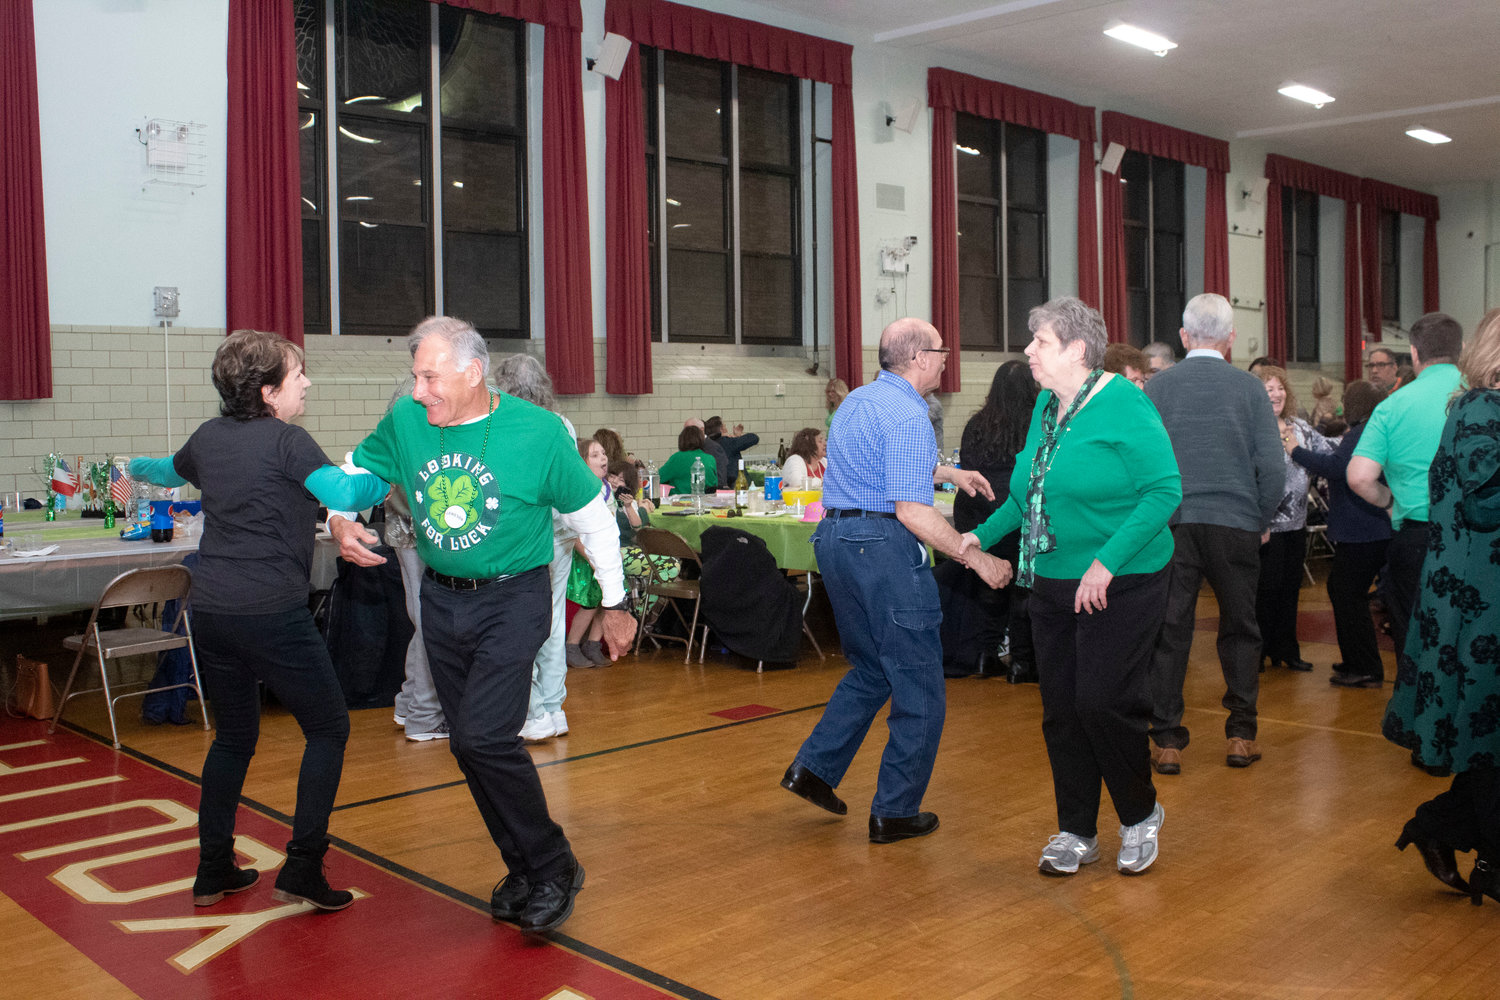 As music ran through the gymnasium, party-goers couldn’t help but get up and dance the night away.